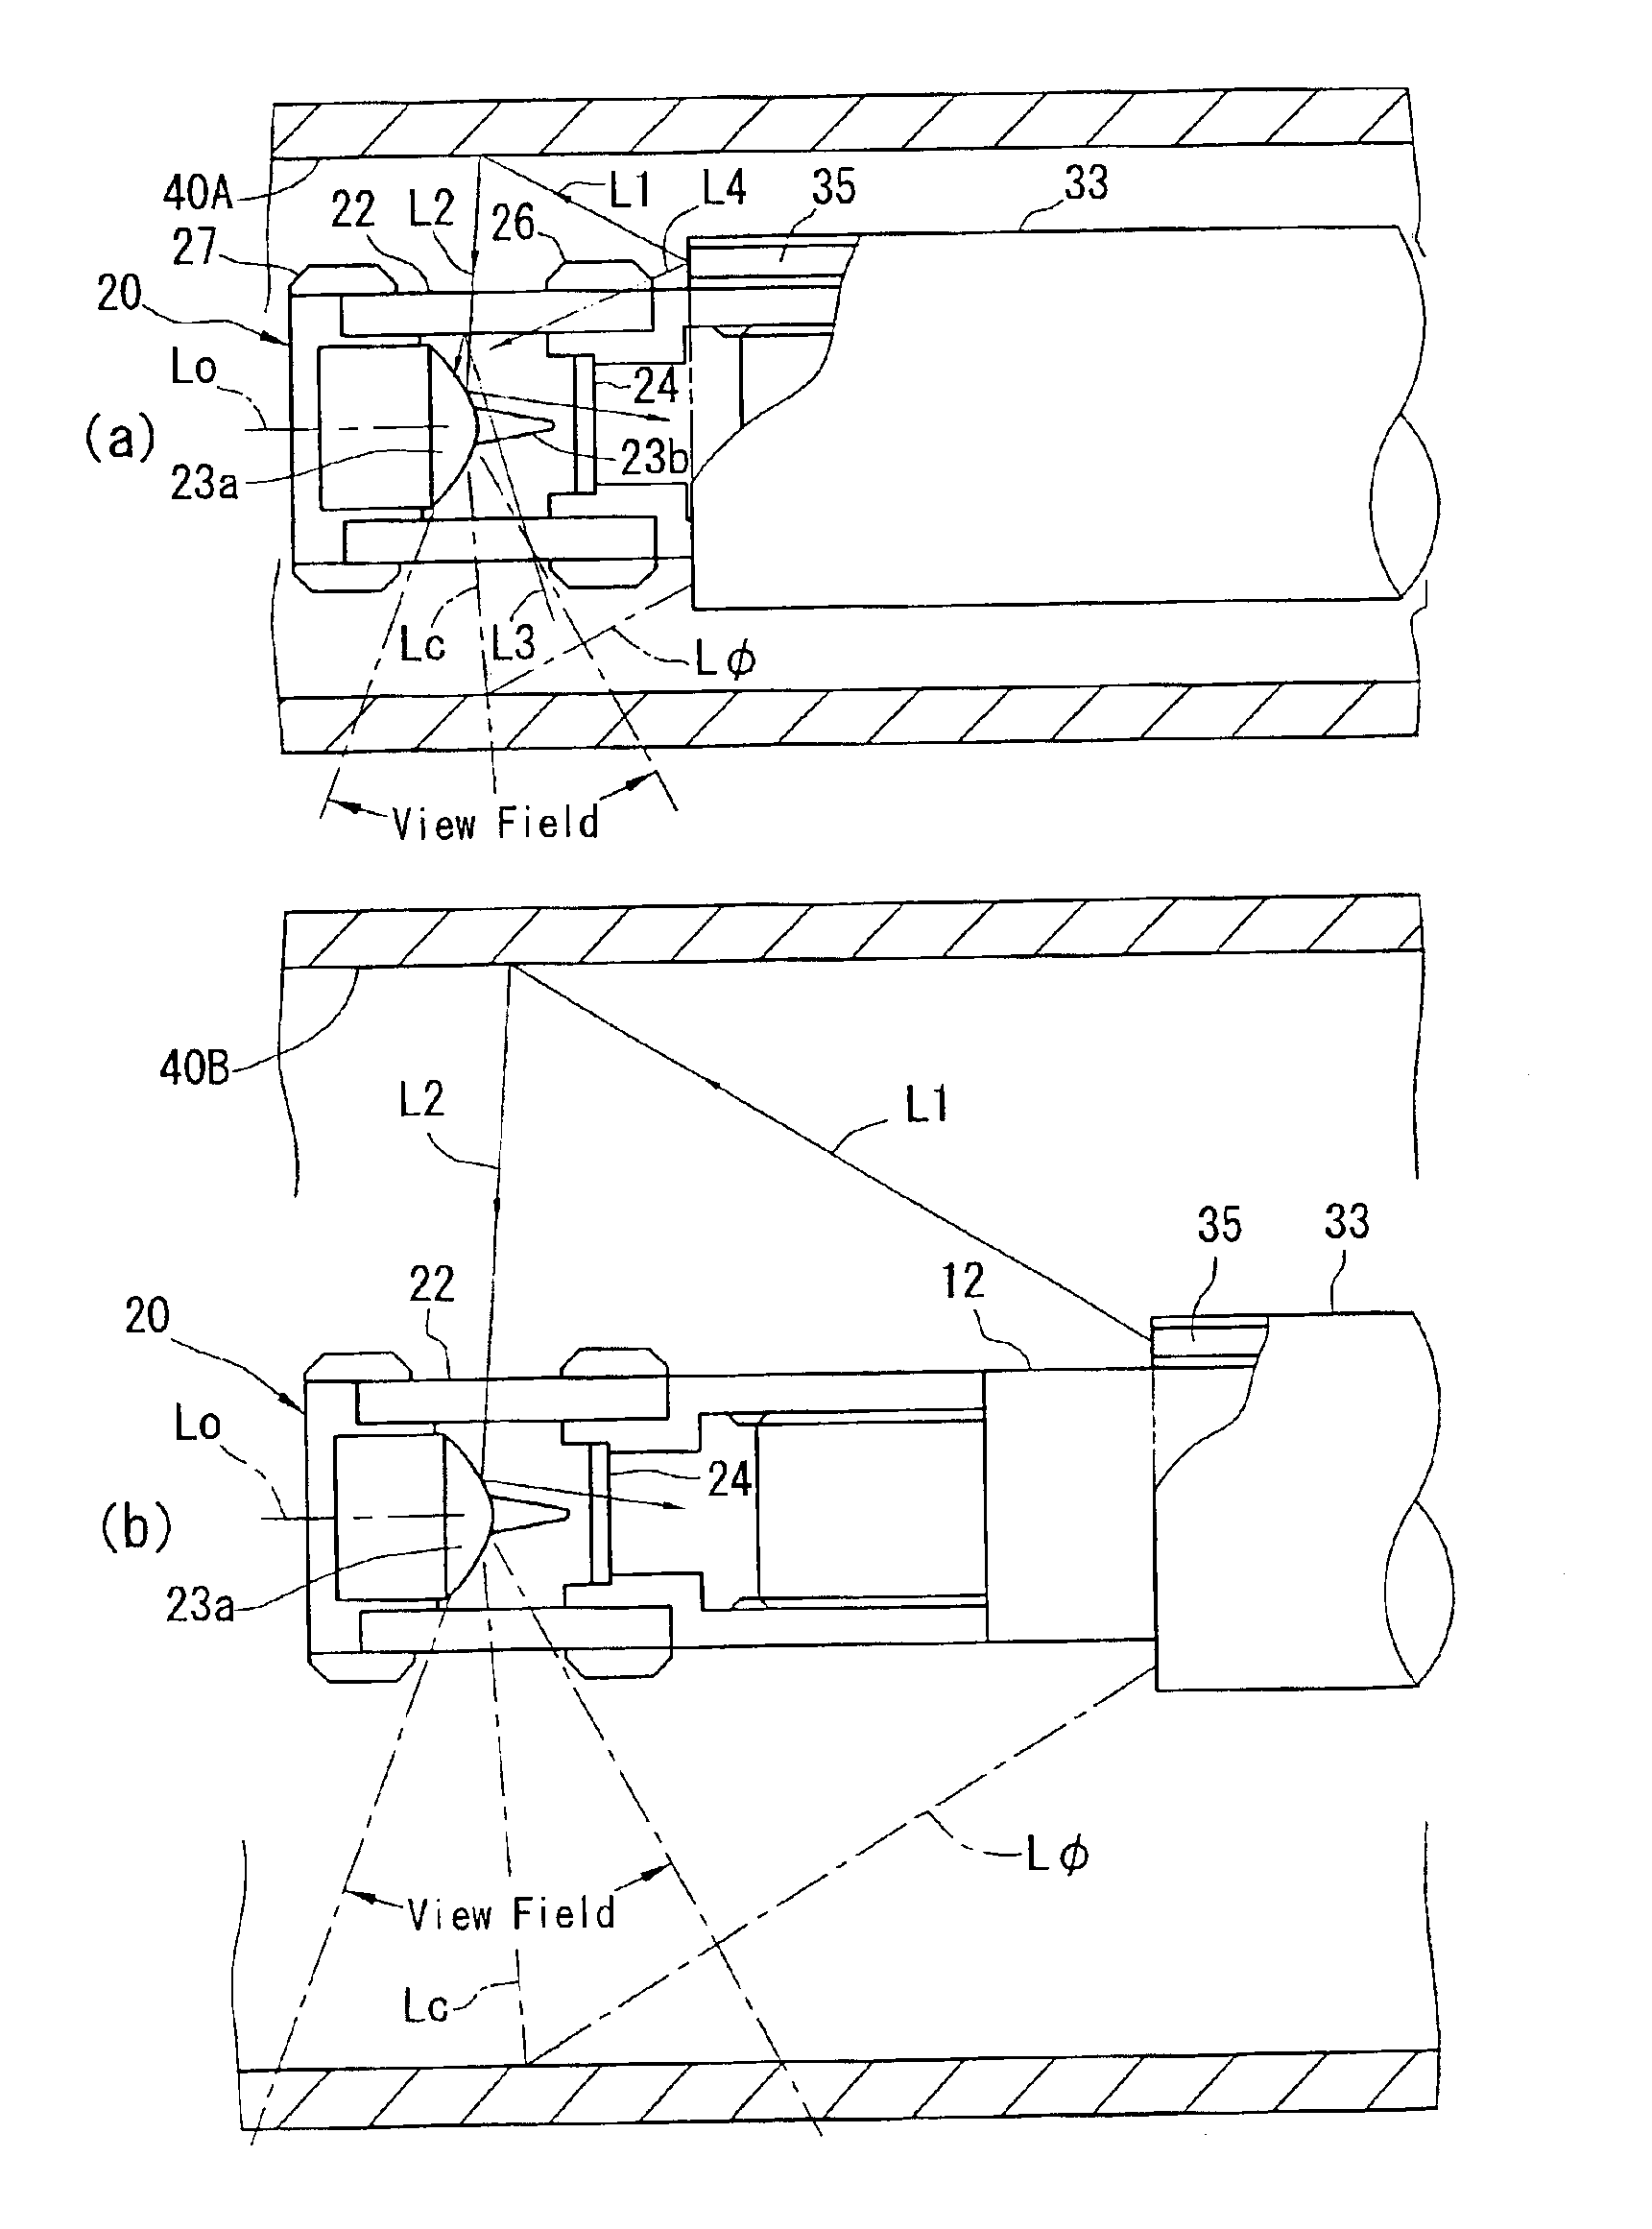 Endoscope apparatus with an omnidirectional view field and a translatable illuminator